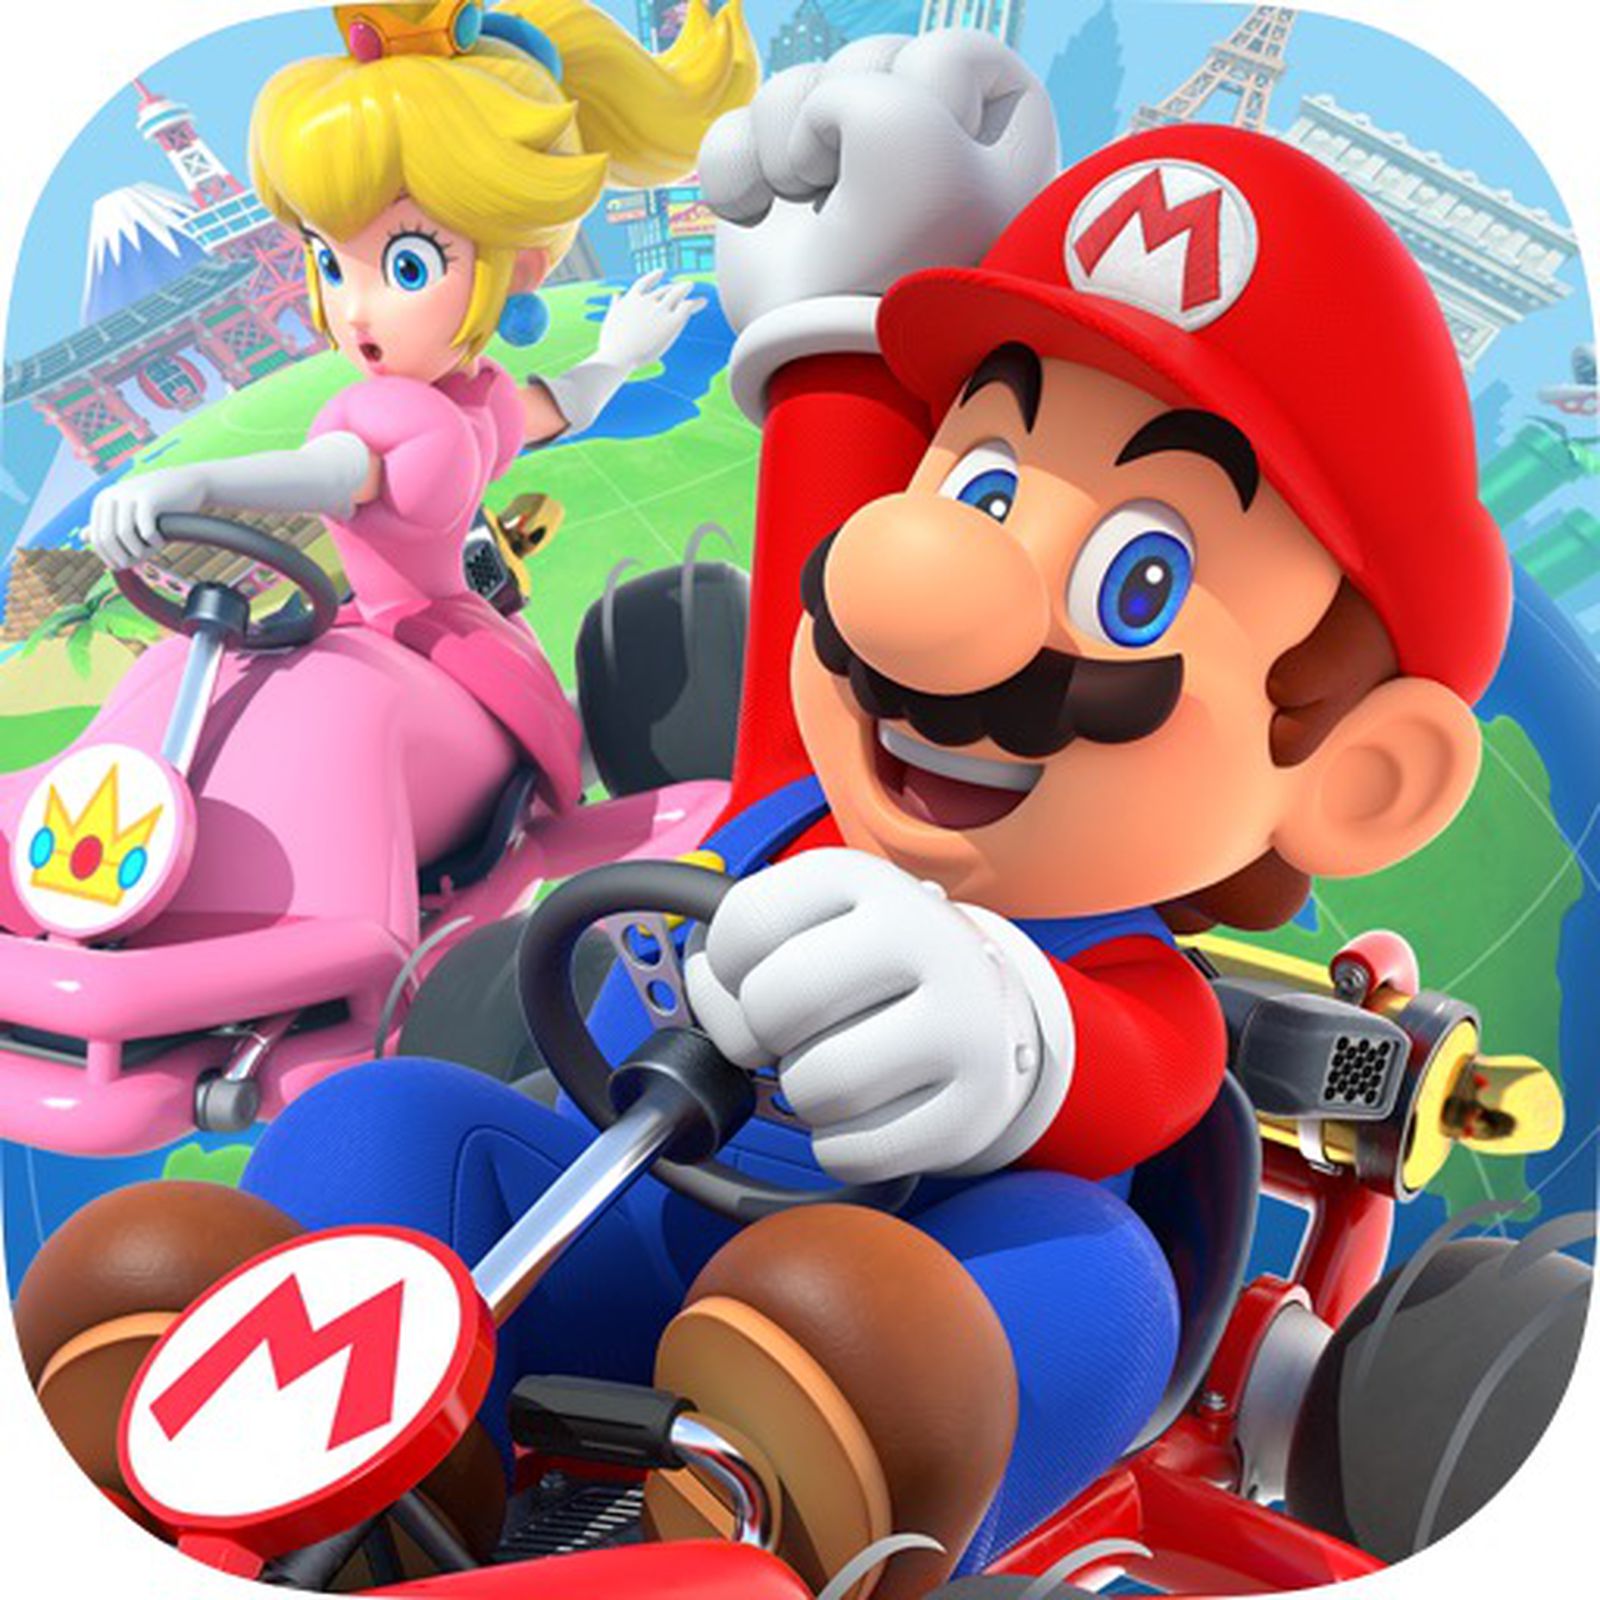 Mario Kart Tour for iOS Will Be Free-to-Play at First (Unfortunately)